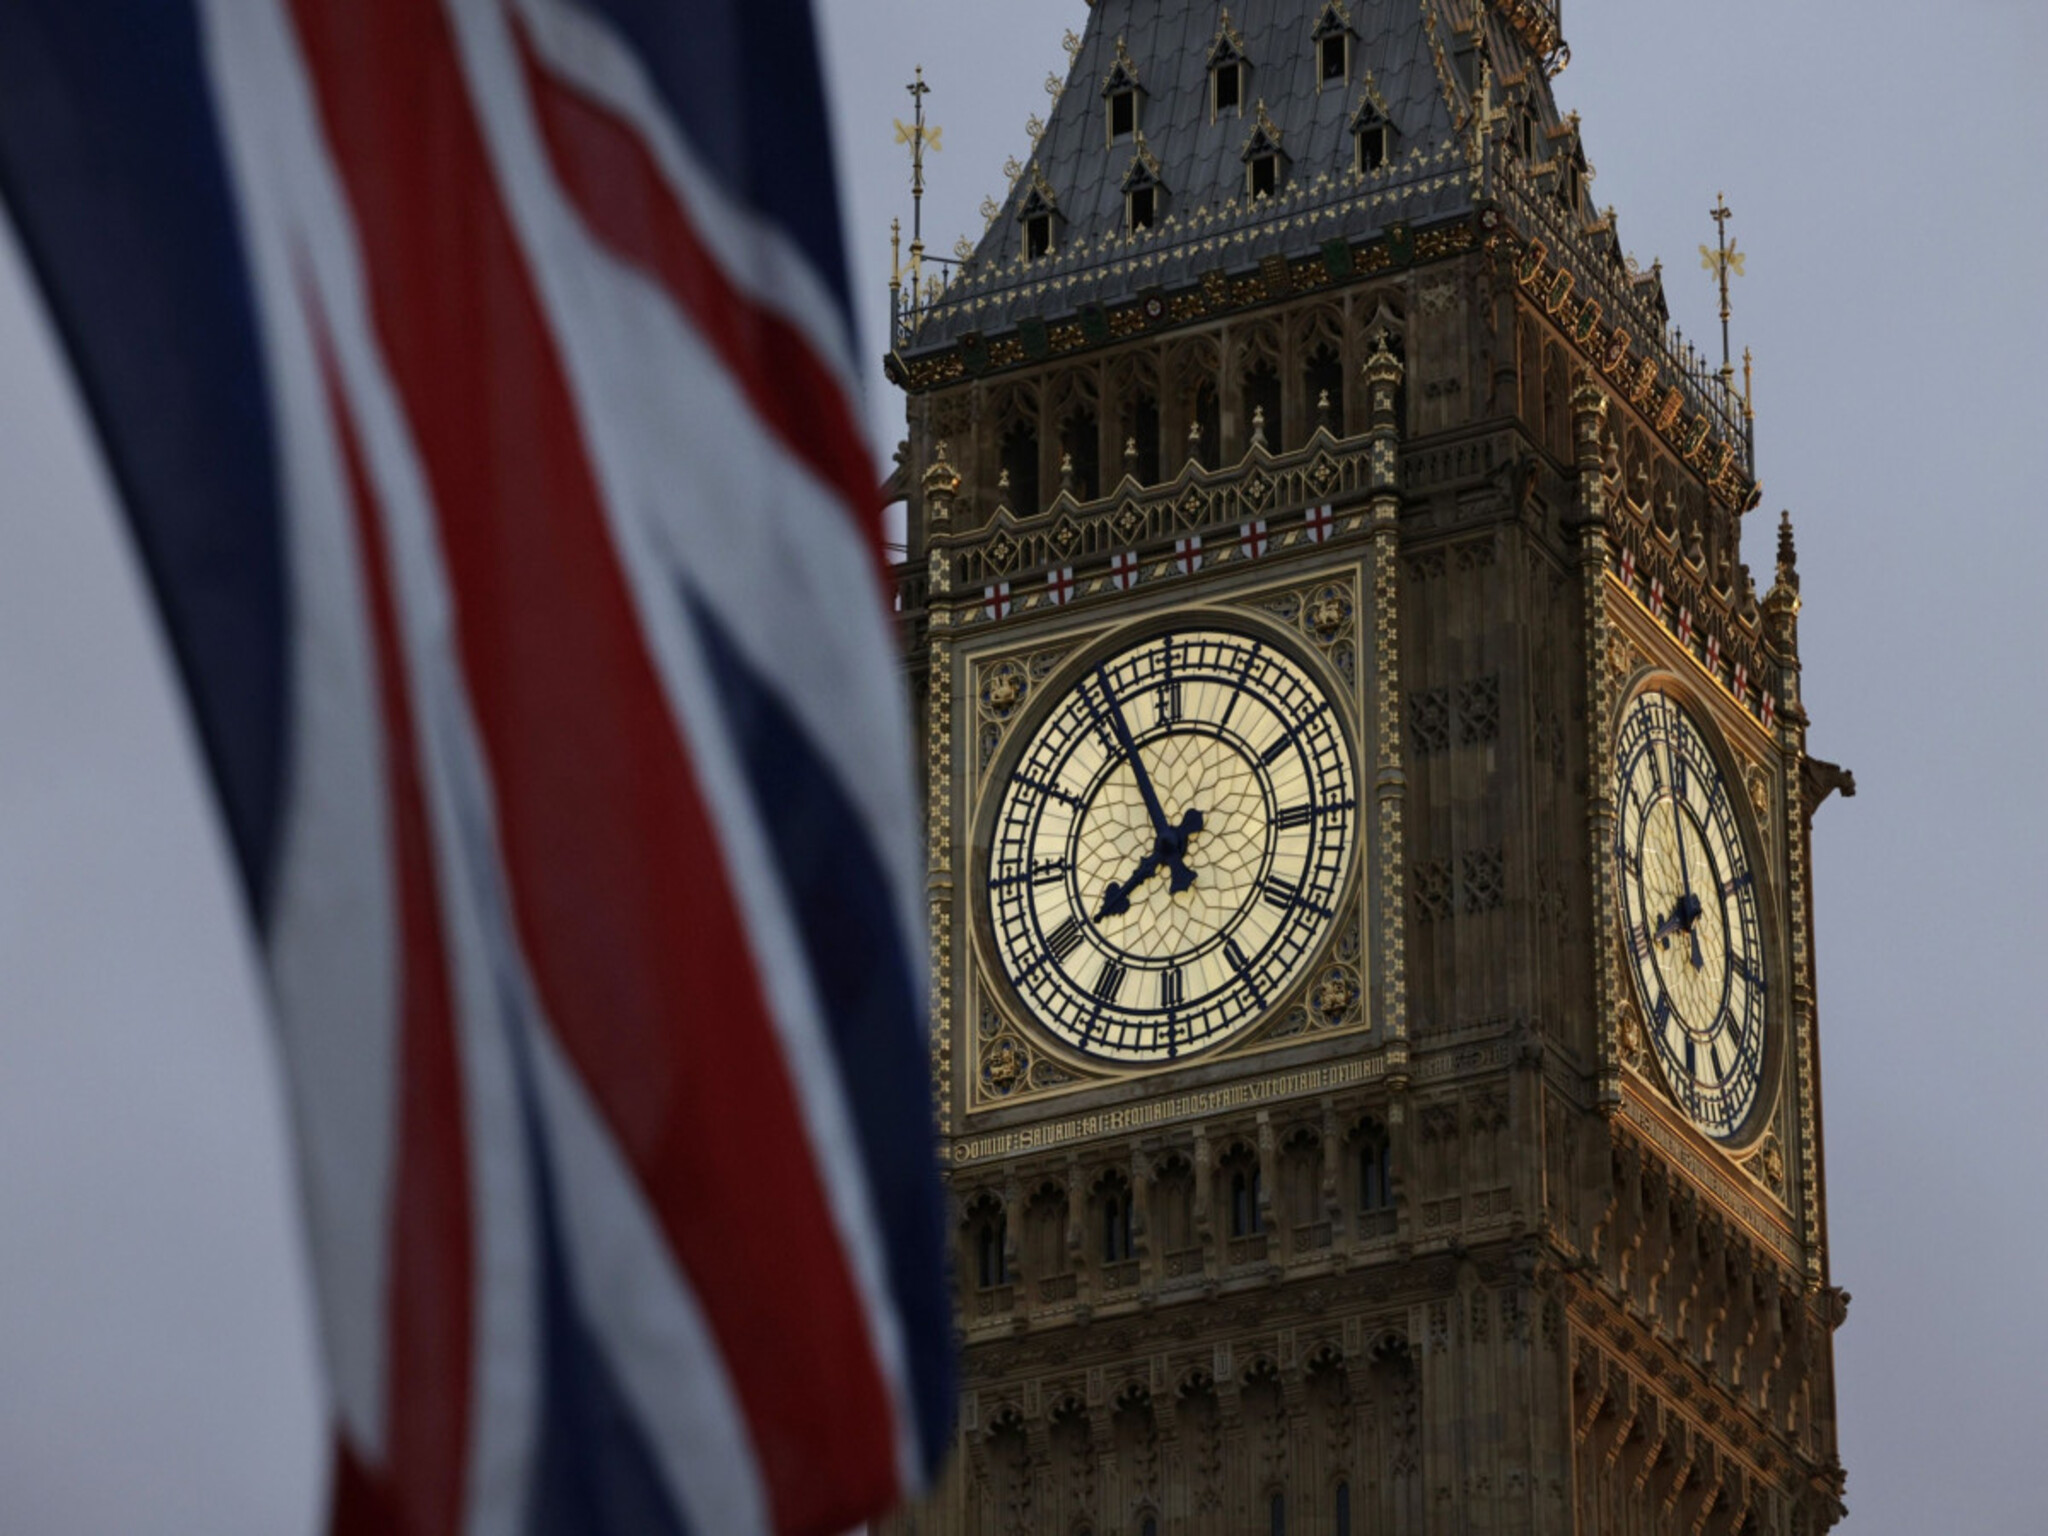 Britain issues a decision regarding the application for an electronic travel permit